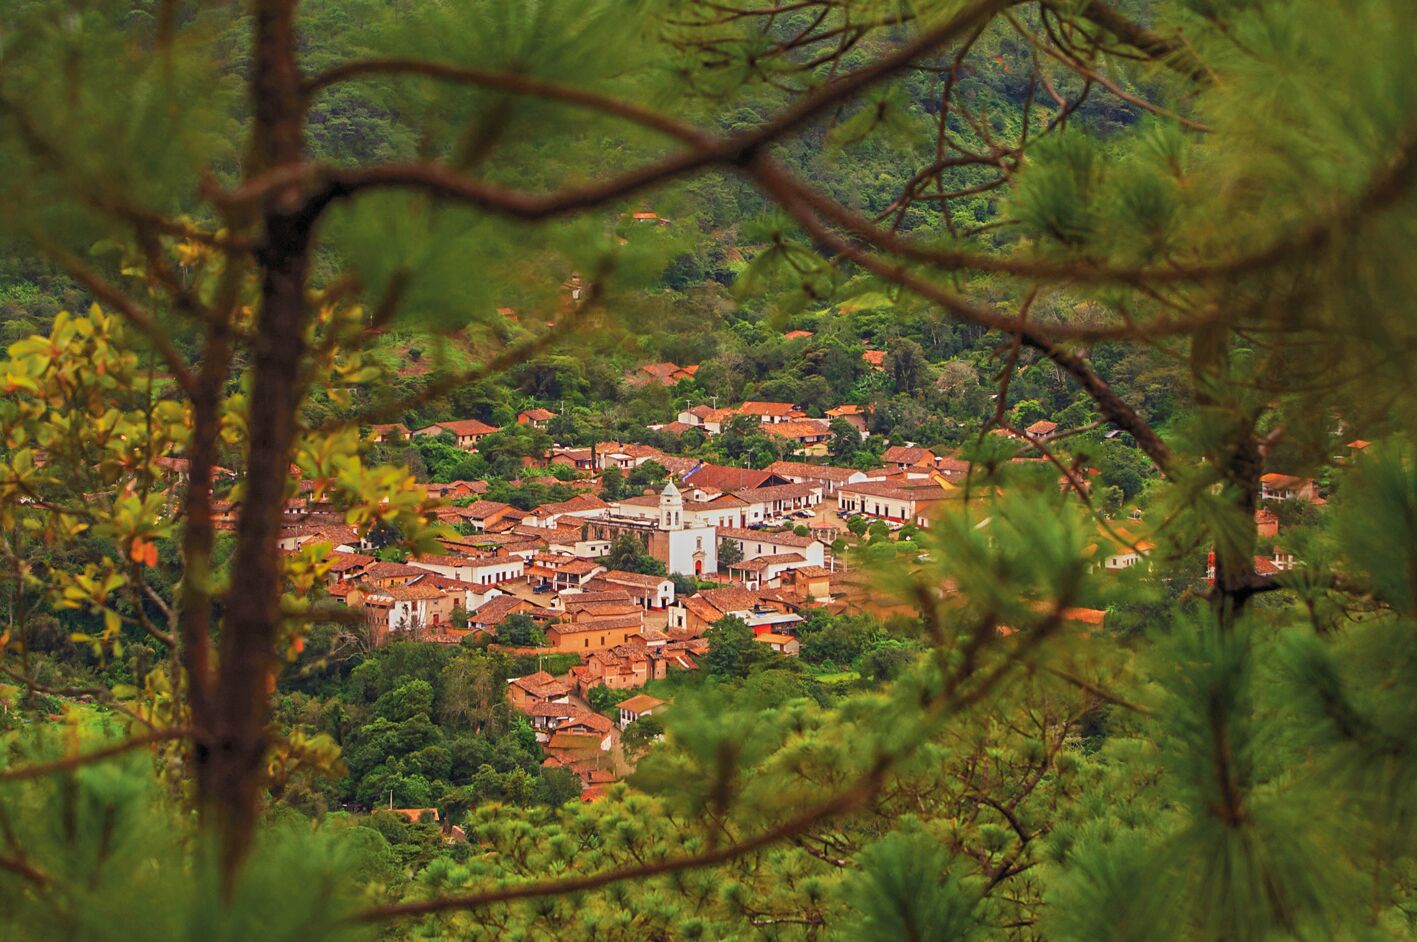 a view of the village in southern Puerto Vallarta through the trees